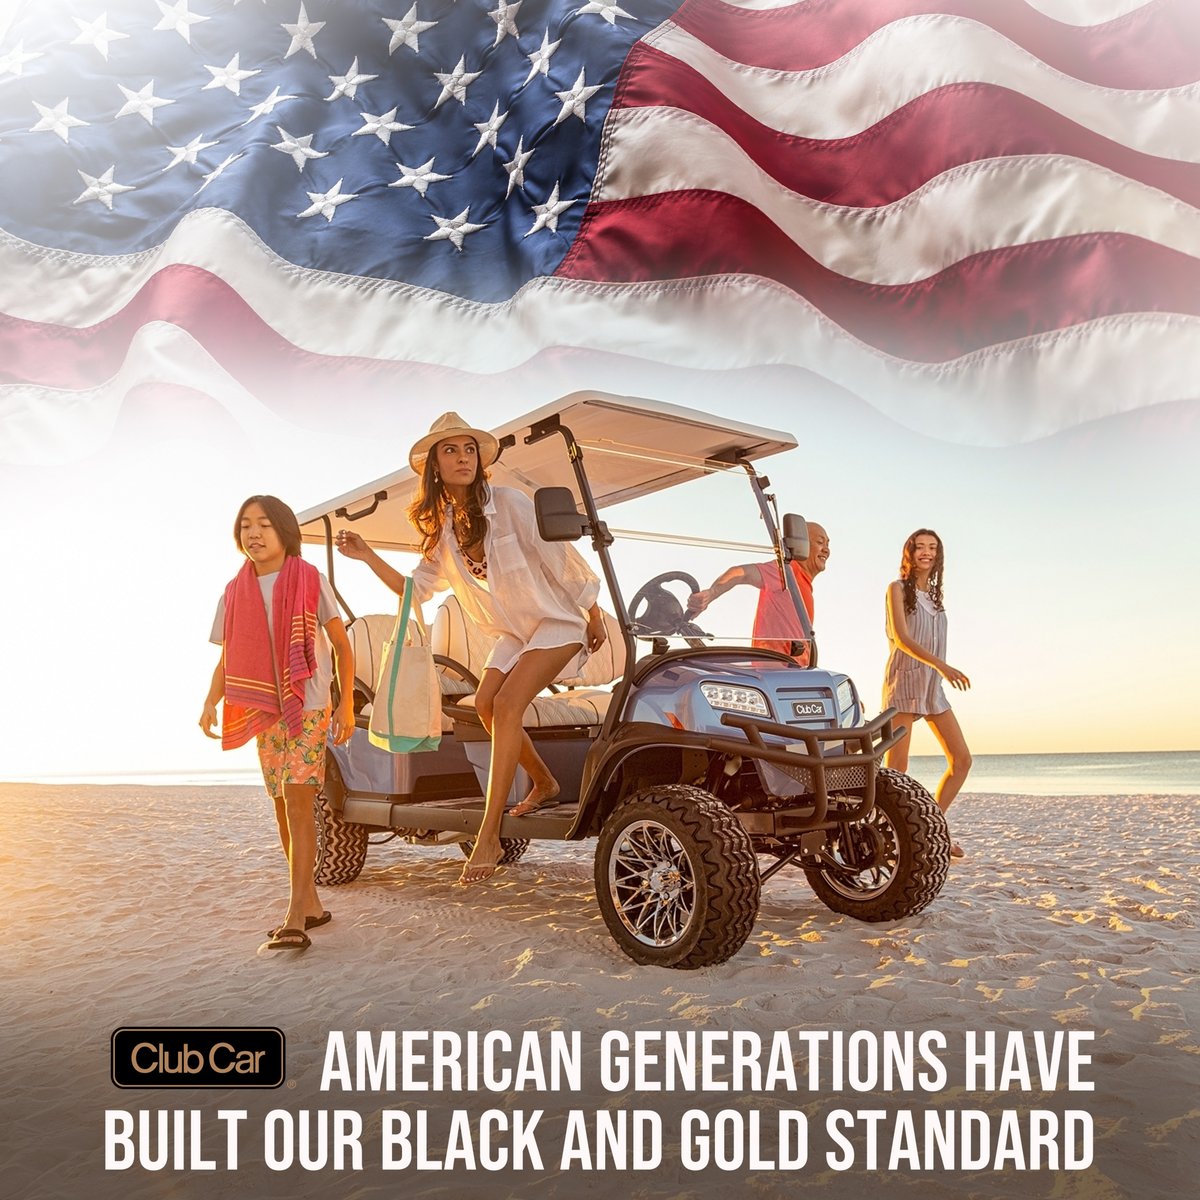 The black and gold standard: built by American generations.💙❤️ Begin your Club Car journey today and join the legacy of enduring quality and a commitment to exceeding expectations: bit.ly/41DJfOx